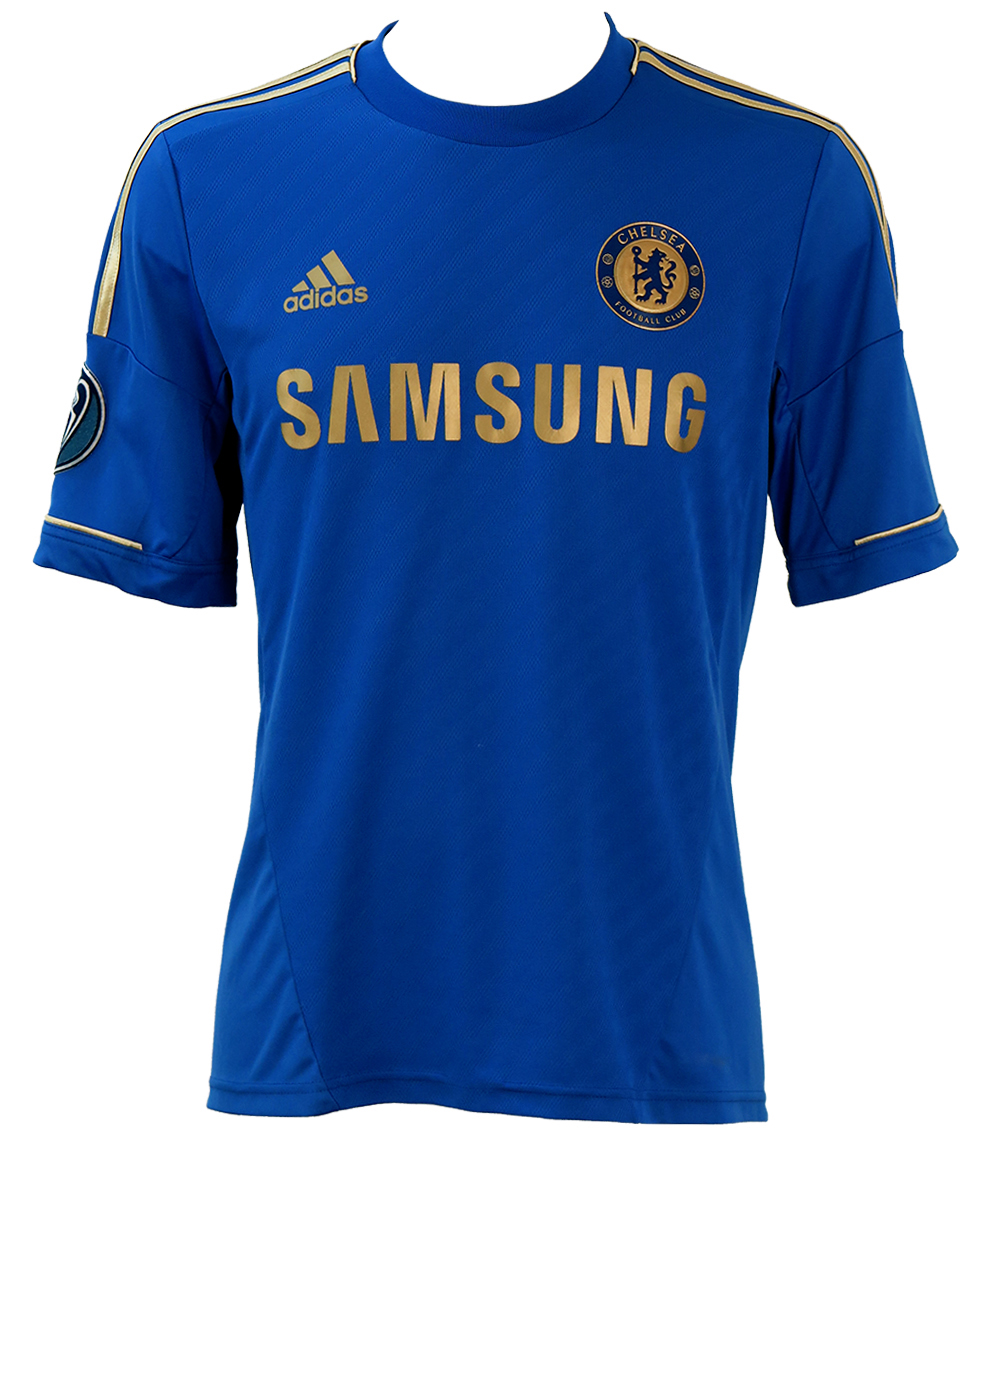 chelsea blue and gold kit